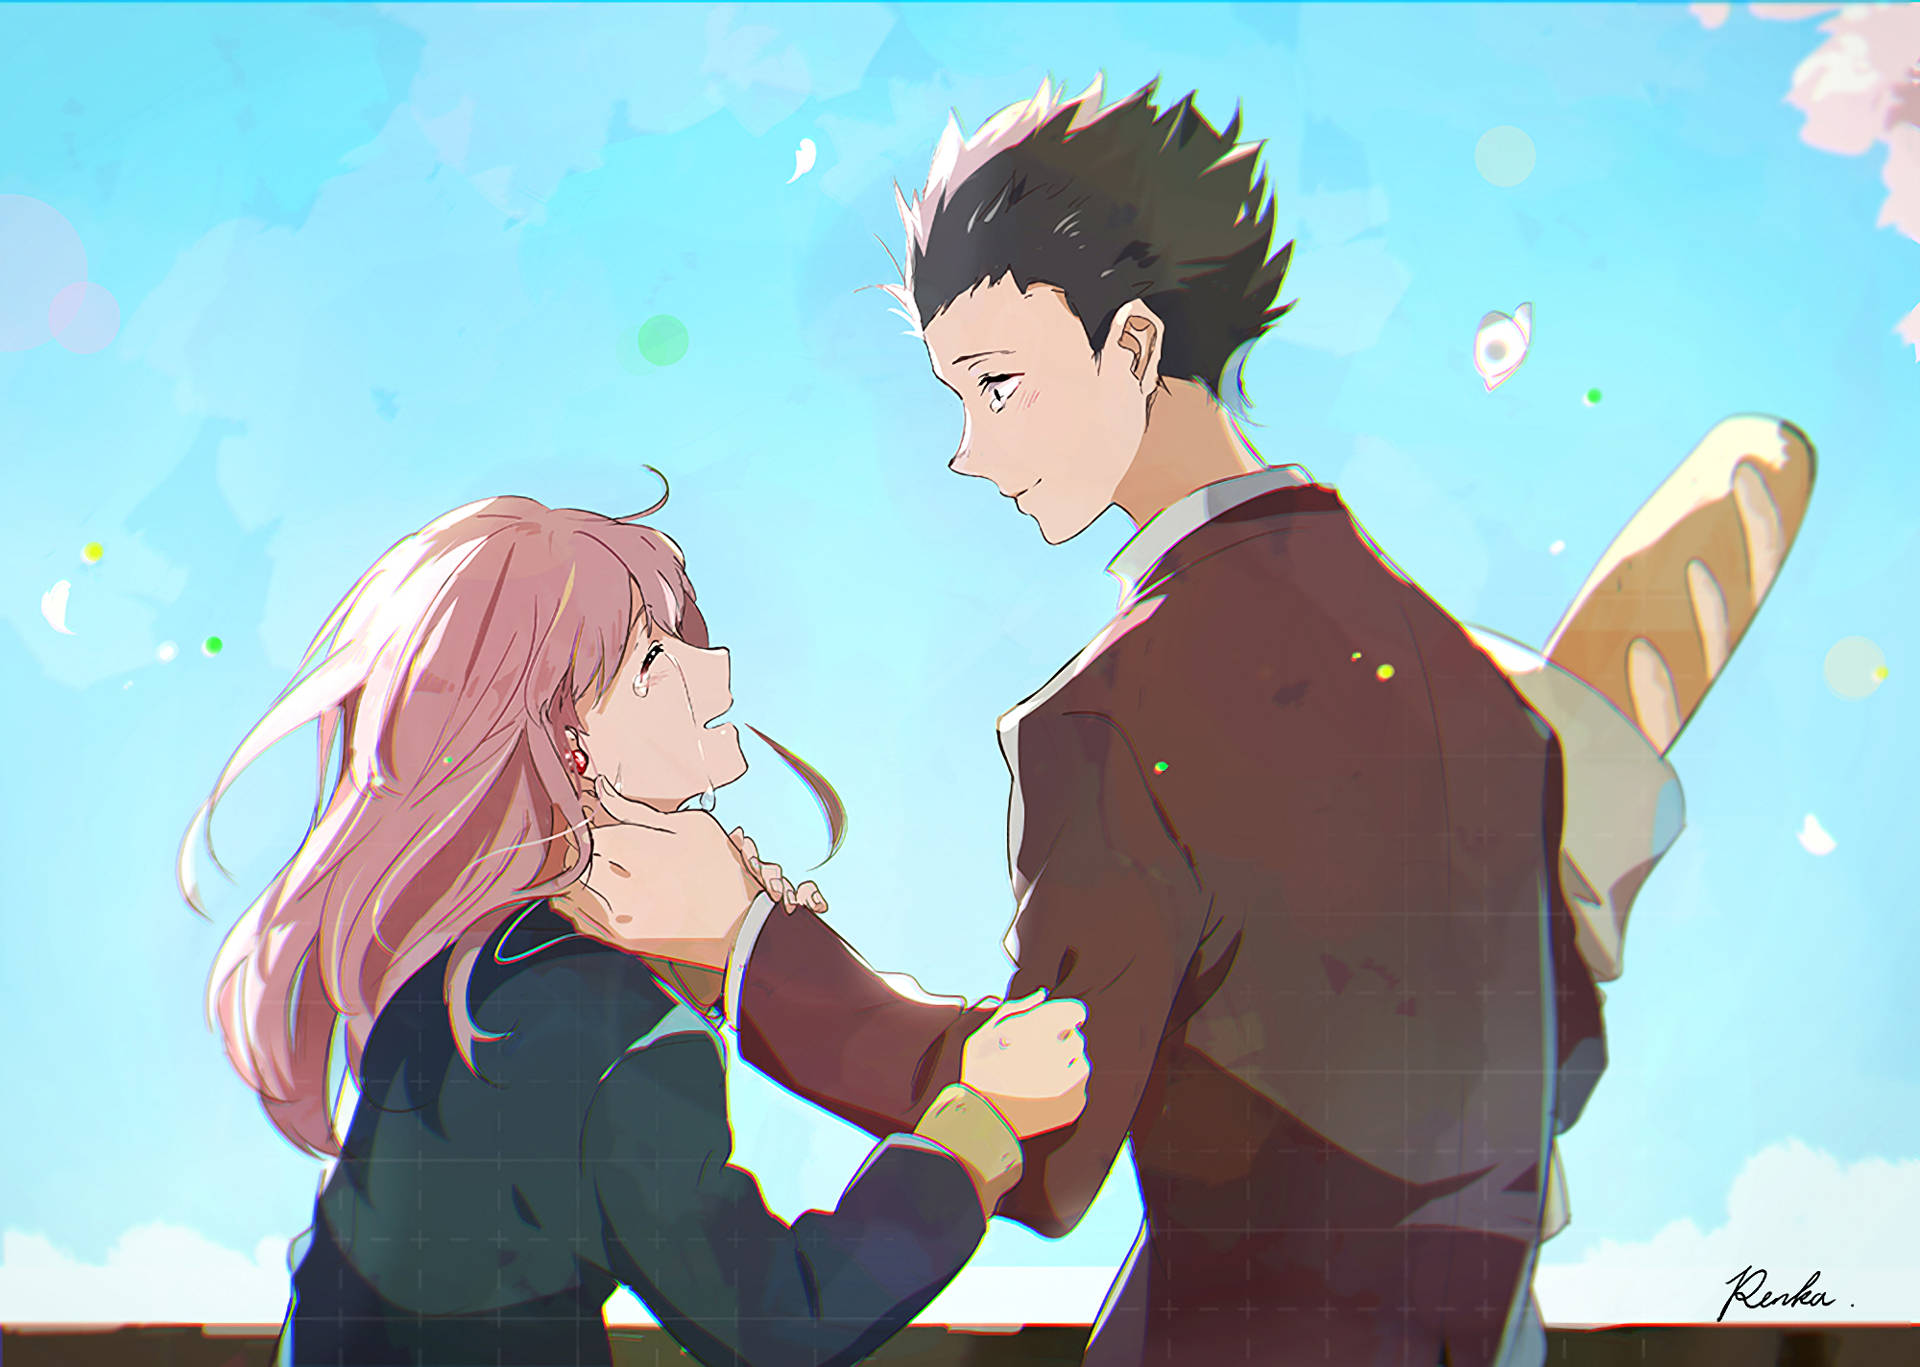 An Emotional Moment Between Two Friends From The Anime A Silent Voice Wallpaper